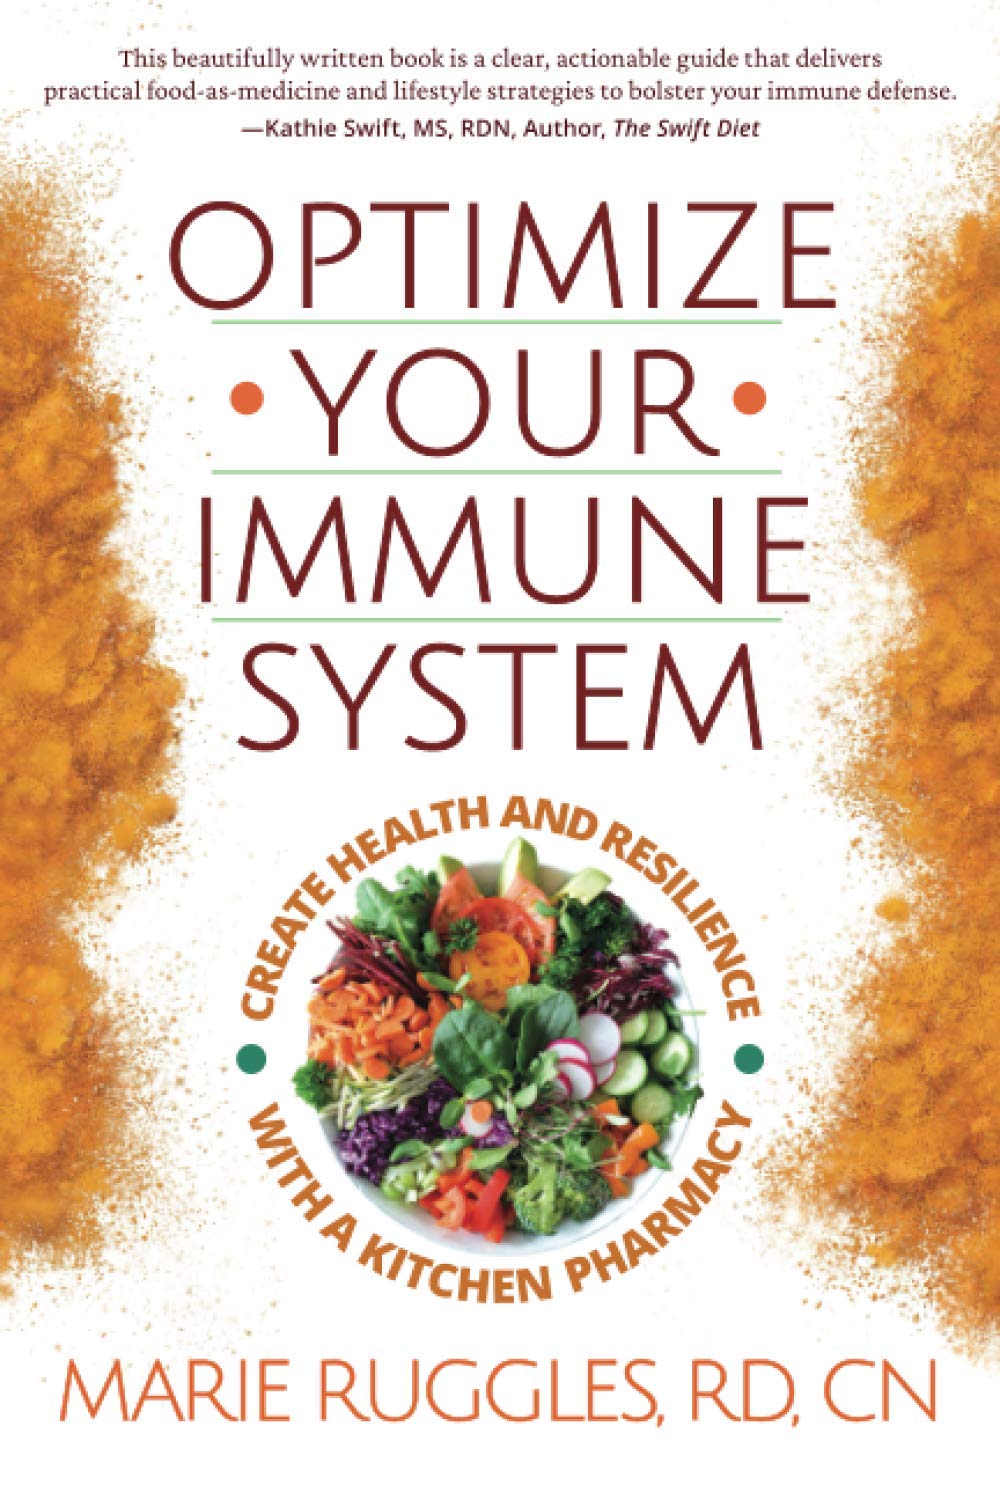 Book Cover for the book Optimize Your Immune System by Marie Ruggles, featuring a circle of healthy vegetables with the words create health and resilience with a kitchen pharmacy written around the circle of vegetables. 